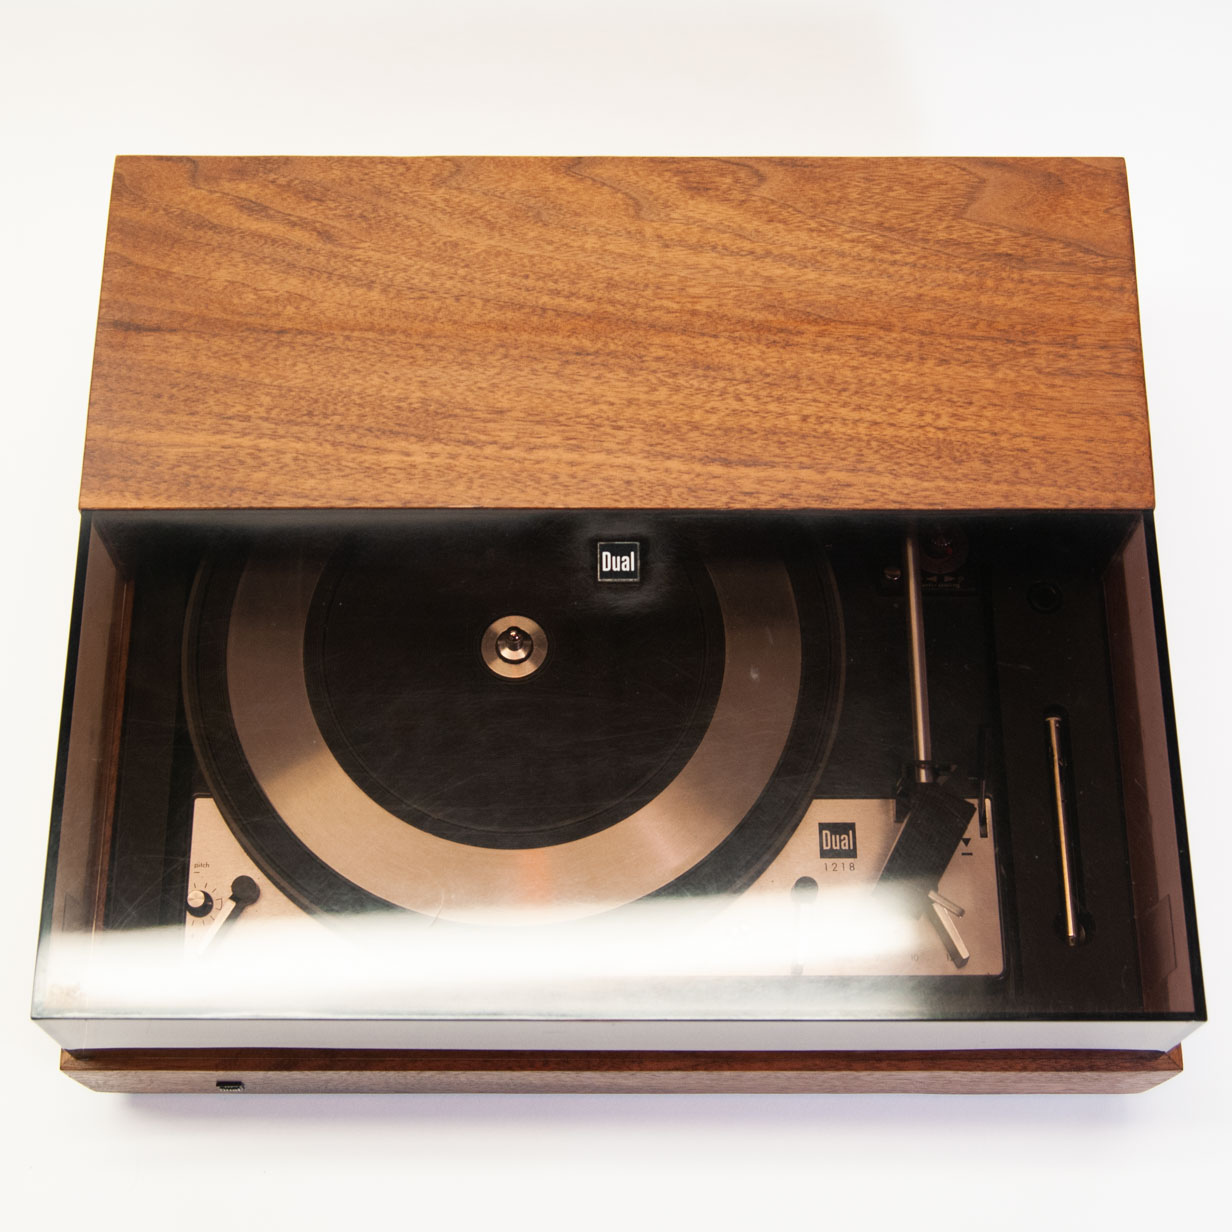 Dual turntable base, top view, dust cover closed